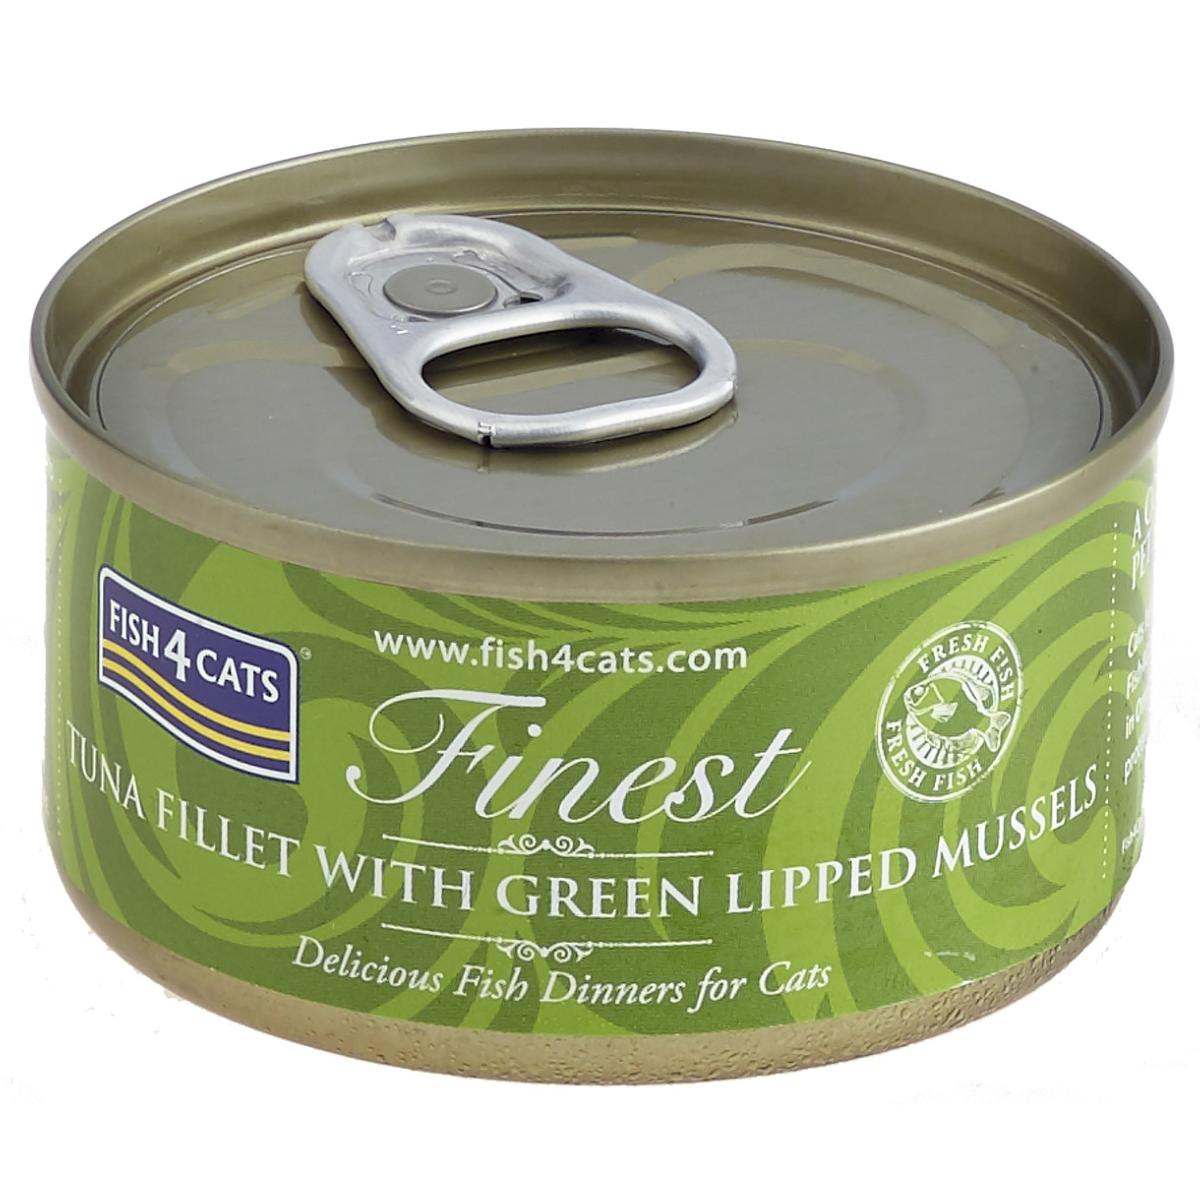 Fish4Cats Finest | Wet Cat Food | Tuna Fillet with Green Lipped Mussel - 70g